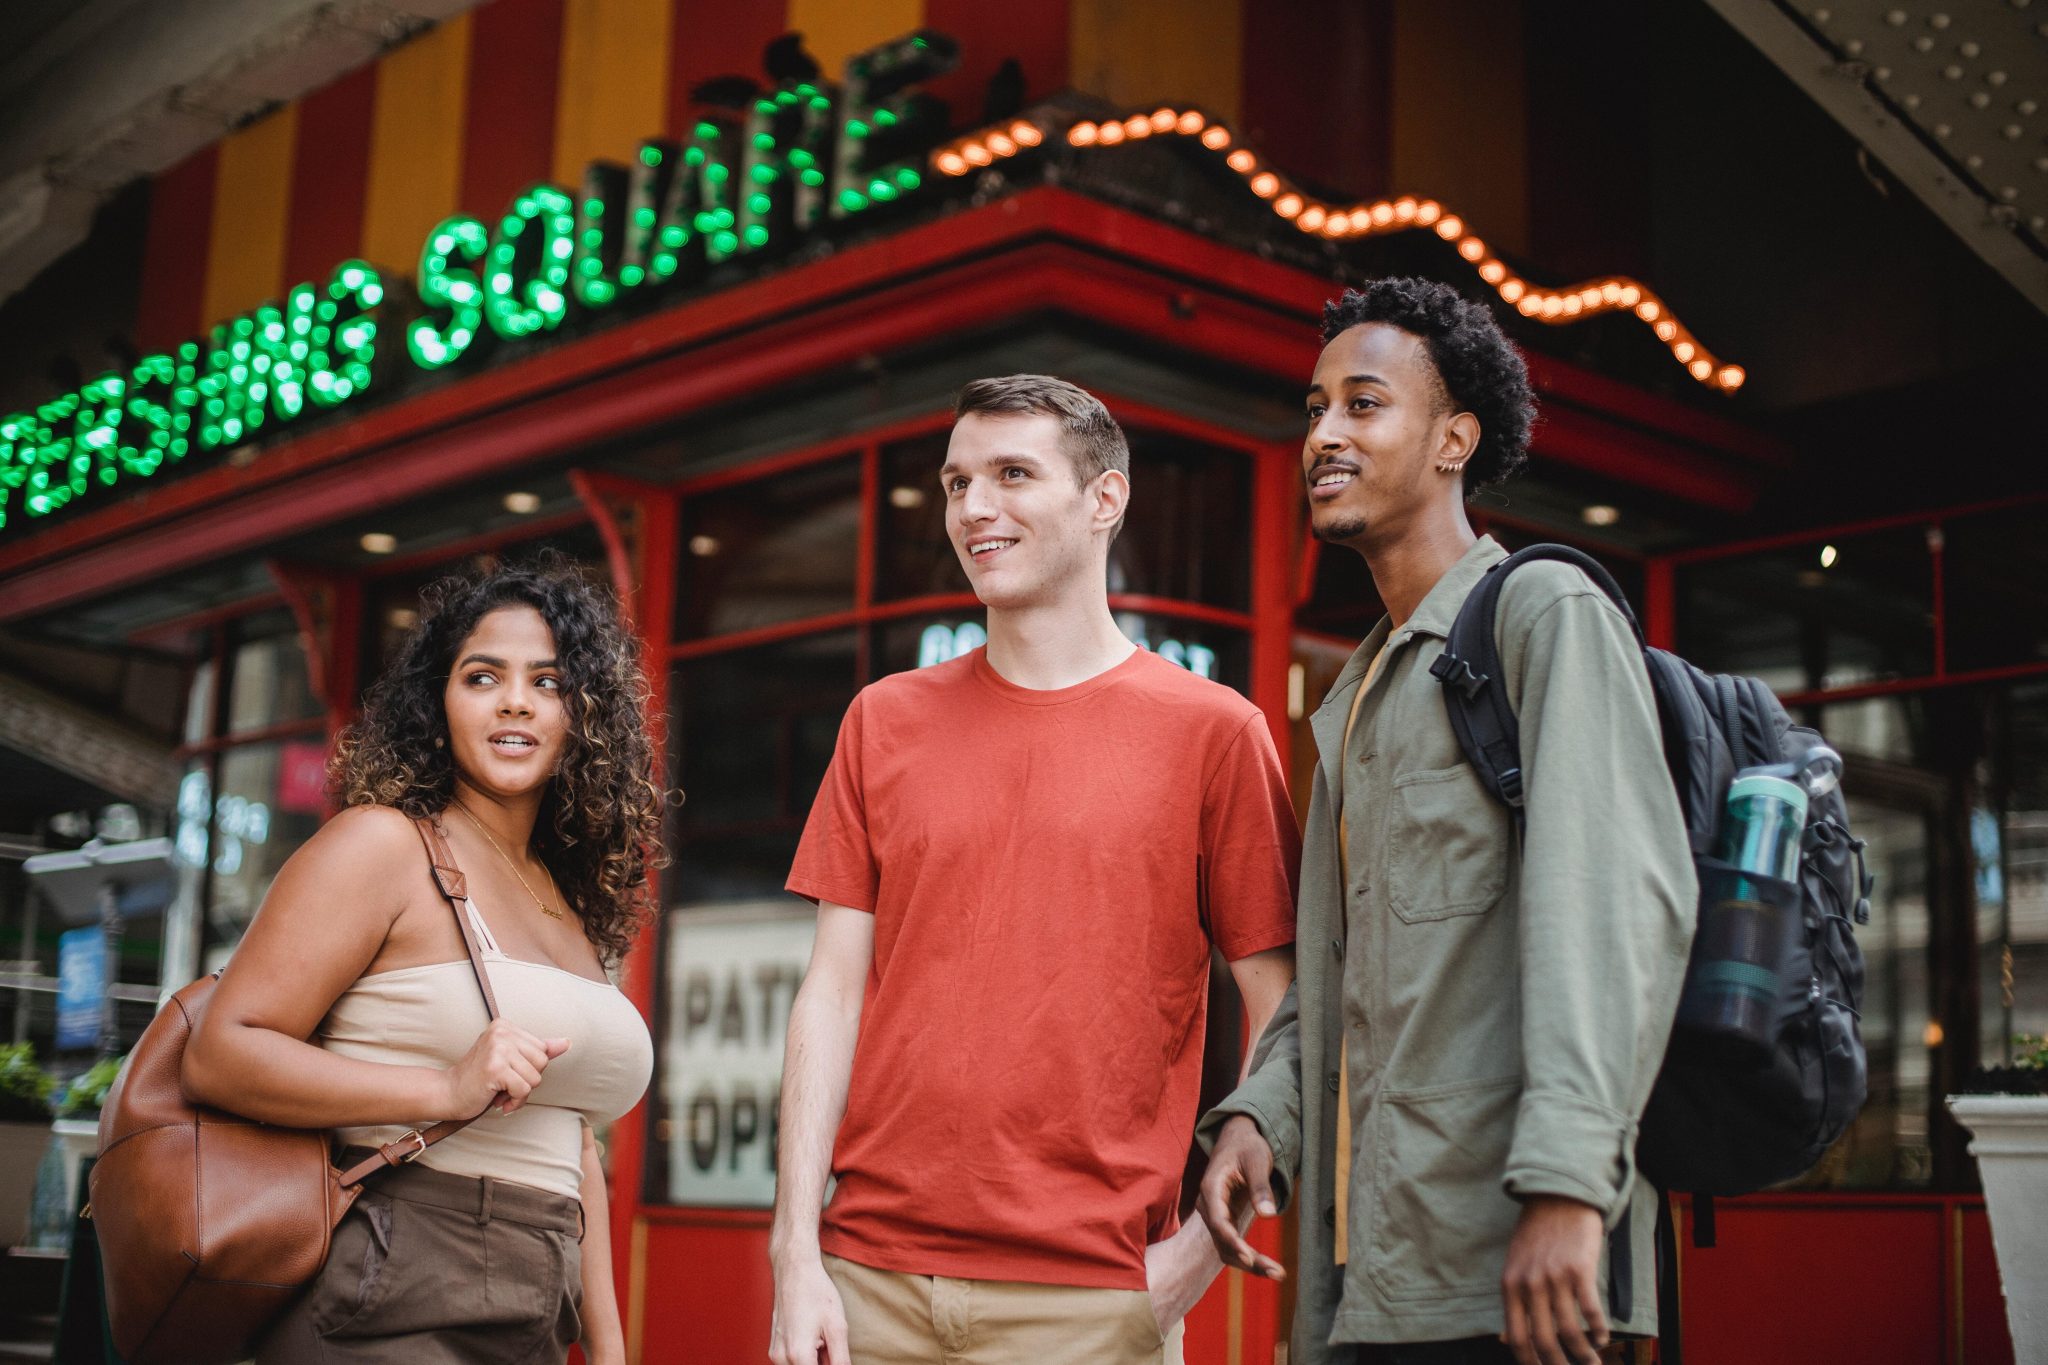 A group of people standing in front of a restaurant